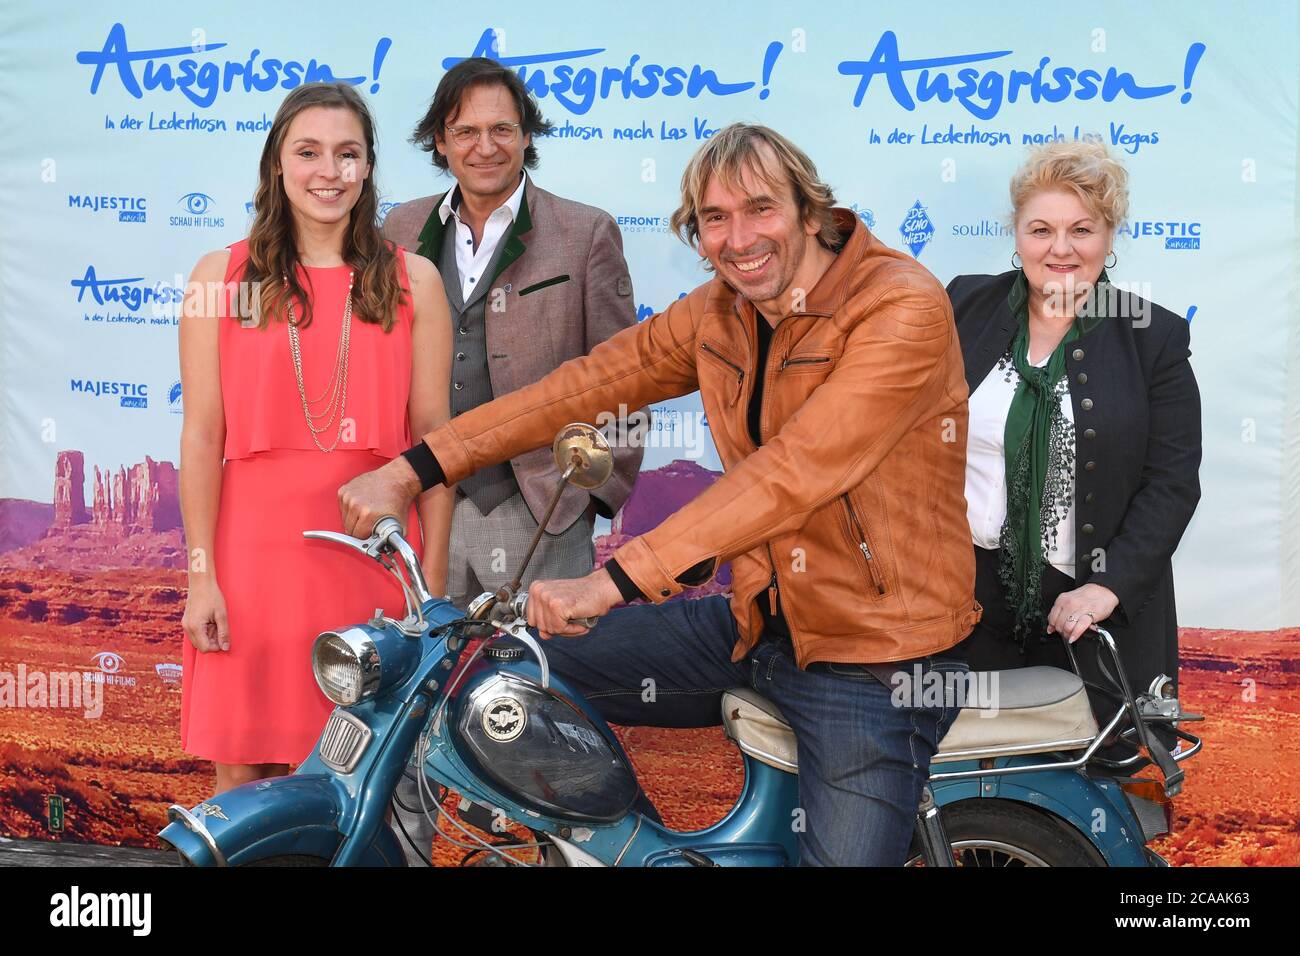 Munich, Germany. 05th Aug, 2020. The actors Stephanie Liebl (l-r), Winfried Frey, Arnd Schimkat and Angelika Sedlmeier, recorded at the premiere of the film 'Ausgrissn!' at the open air cinema 'Kino, Mond und Sterne'. The film will be released in German cinemas on 13.08.2020. Credit: Tobias Hase/dpa/Alamy Live News Stock Photo